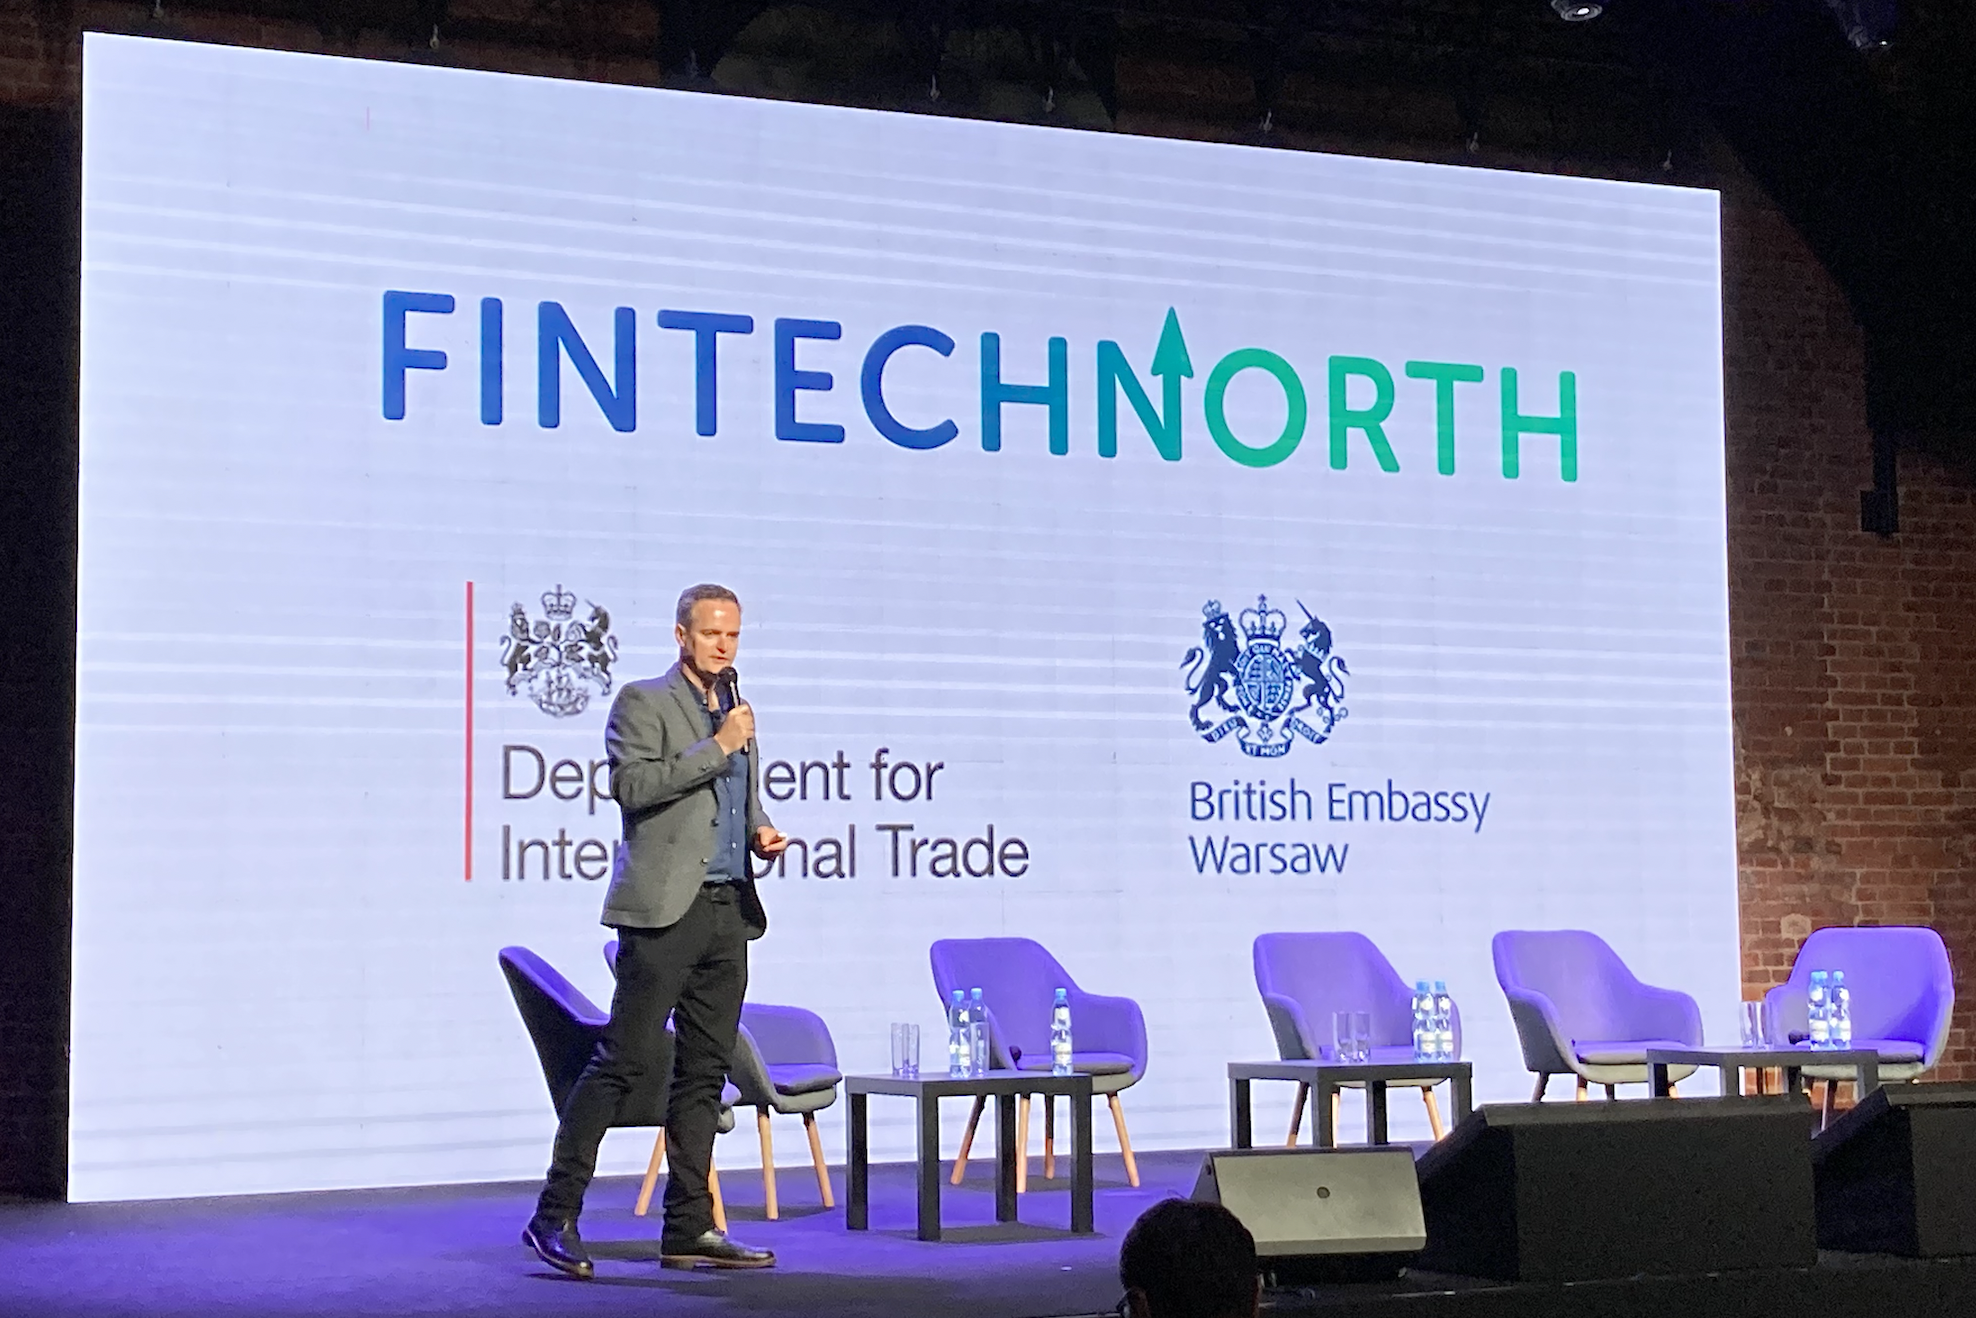 FinTech North takes part in FinTech & E-Commerce Conference in Łódź